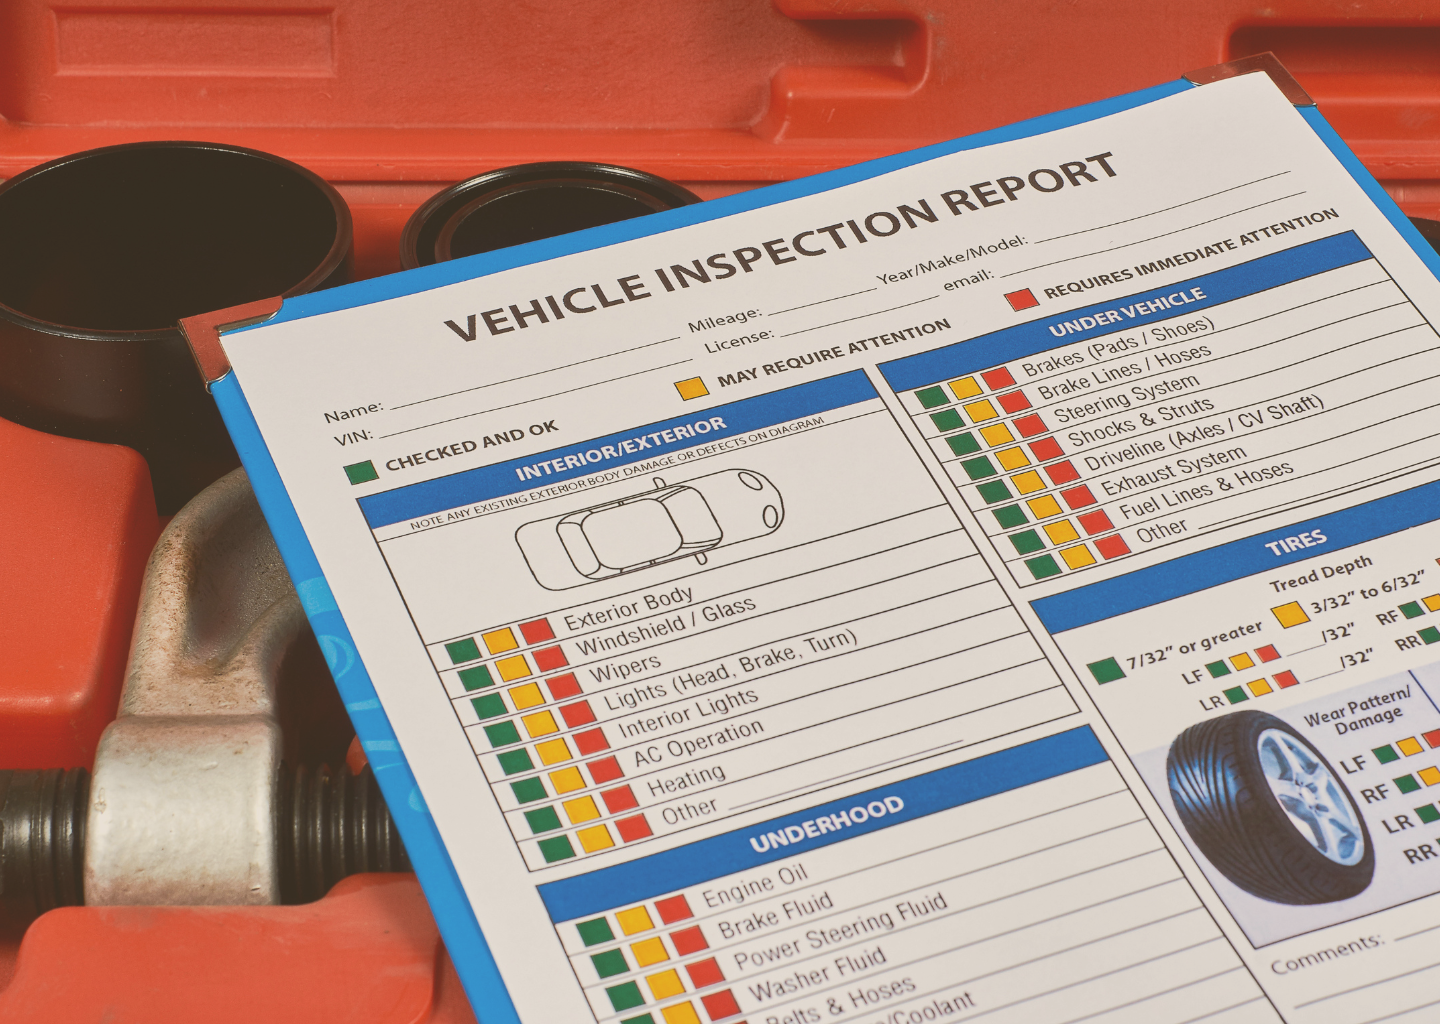 What Makes Vehicle Inspections So Important?